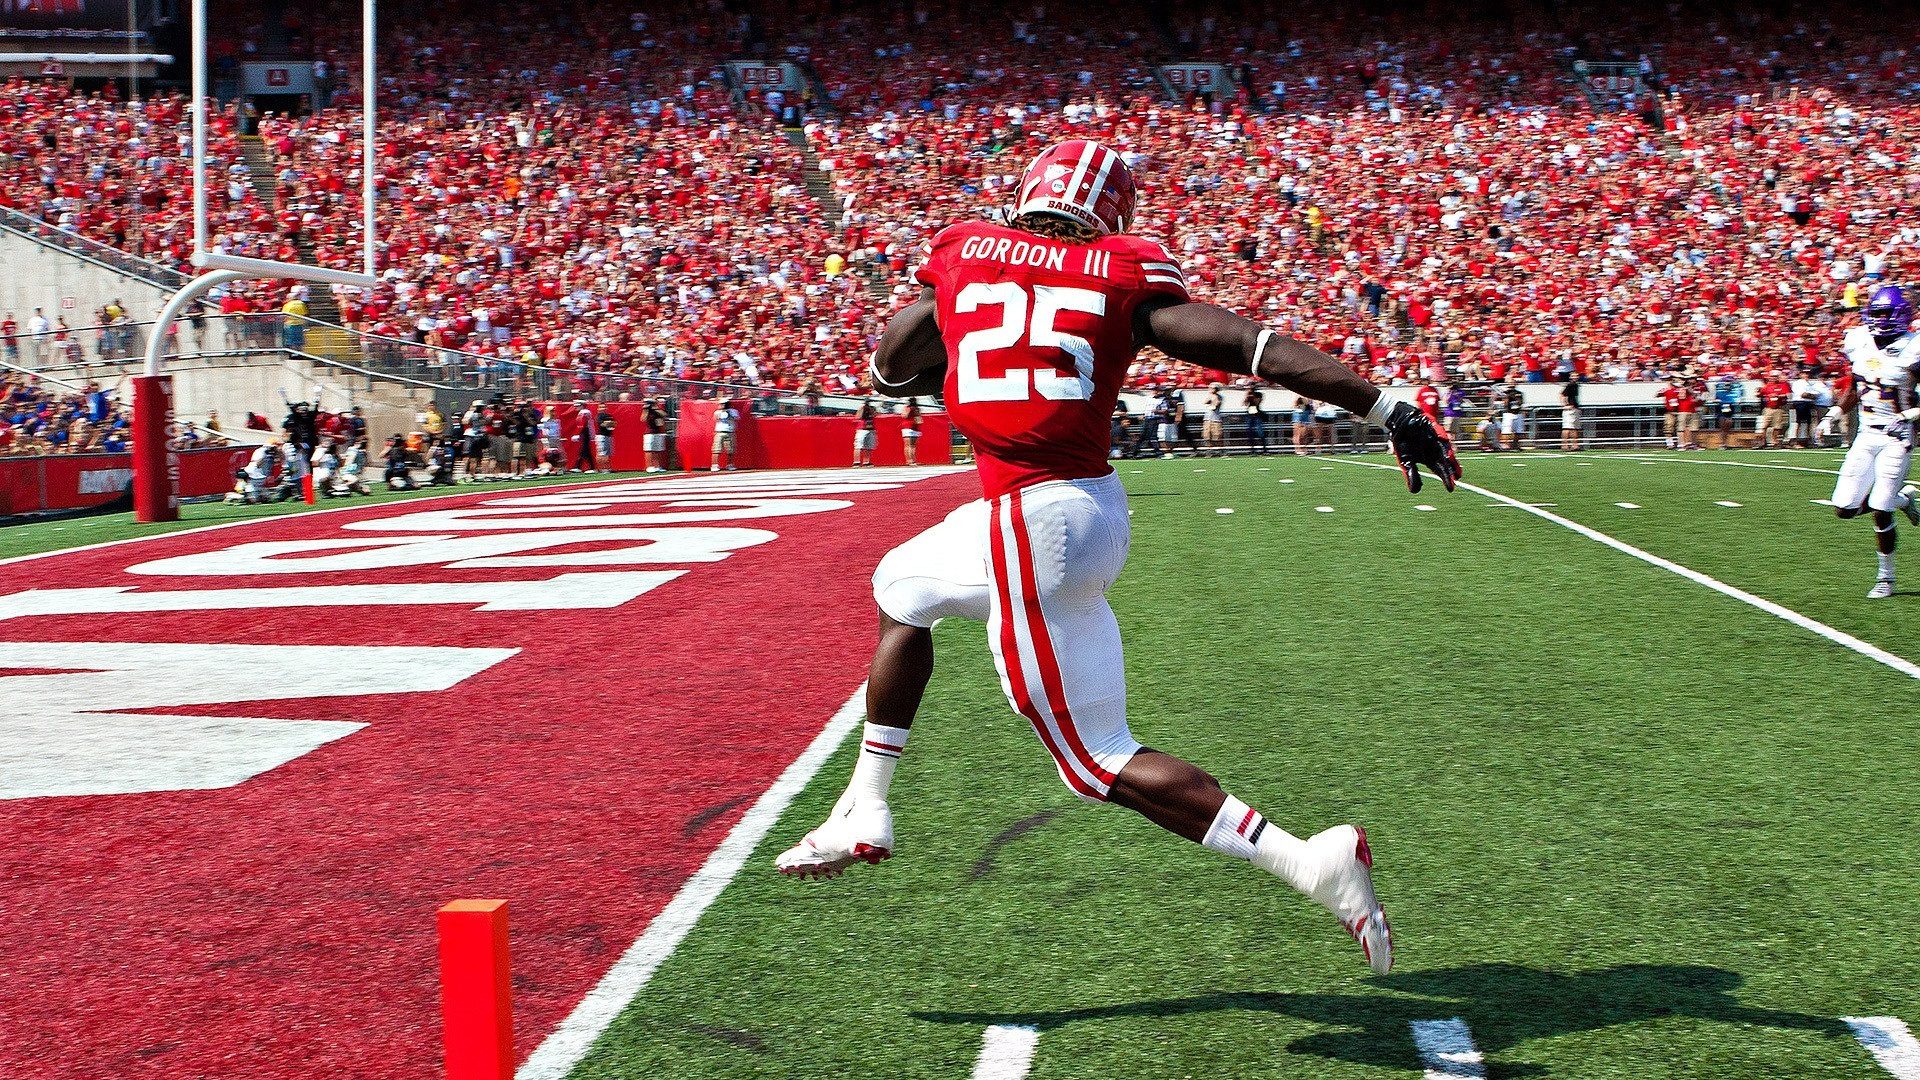 1920x1080 Wisconsin Badgers Wallpaper Awesome Melvin Gordon Nfl Wallpapers Hd